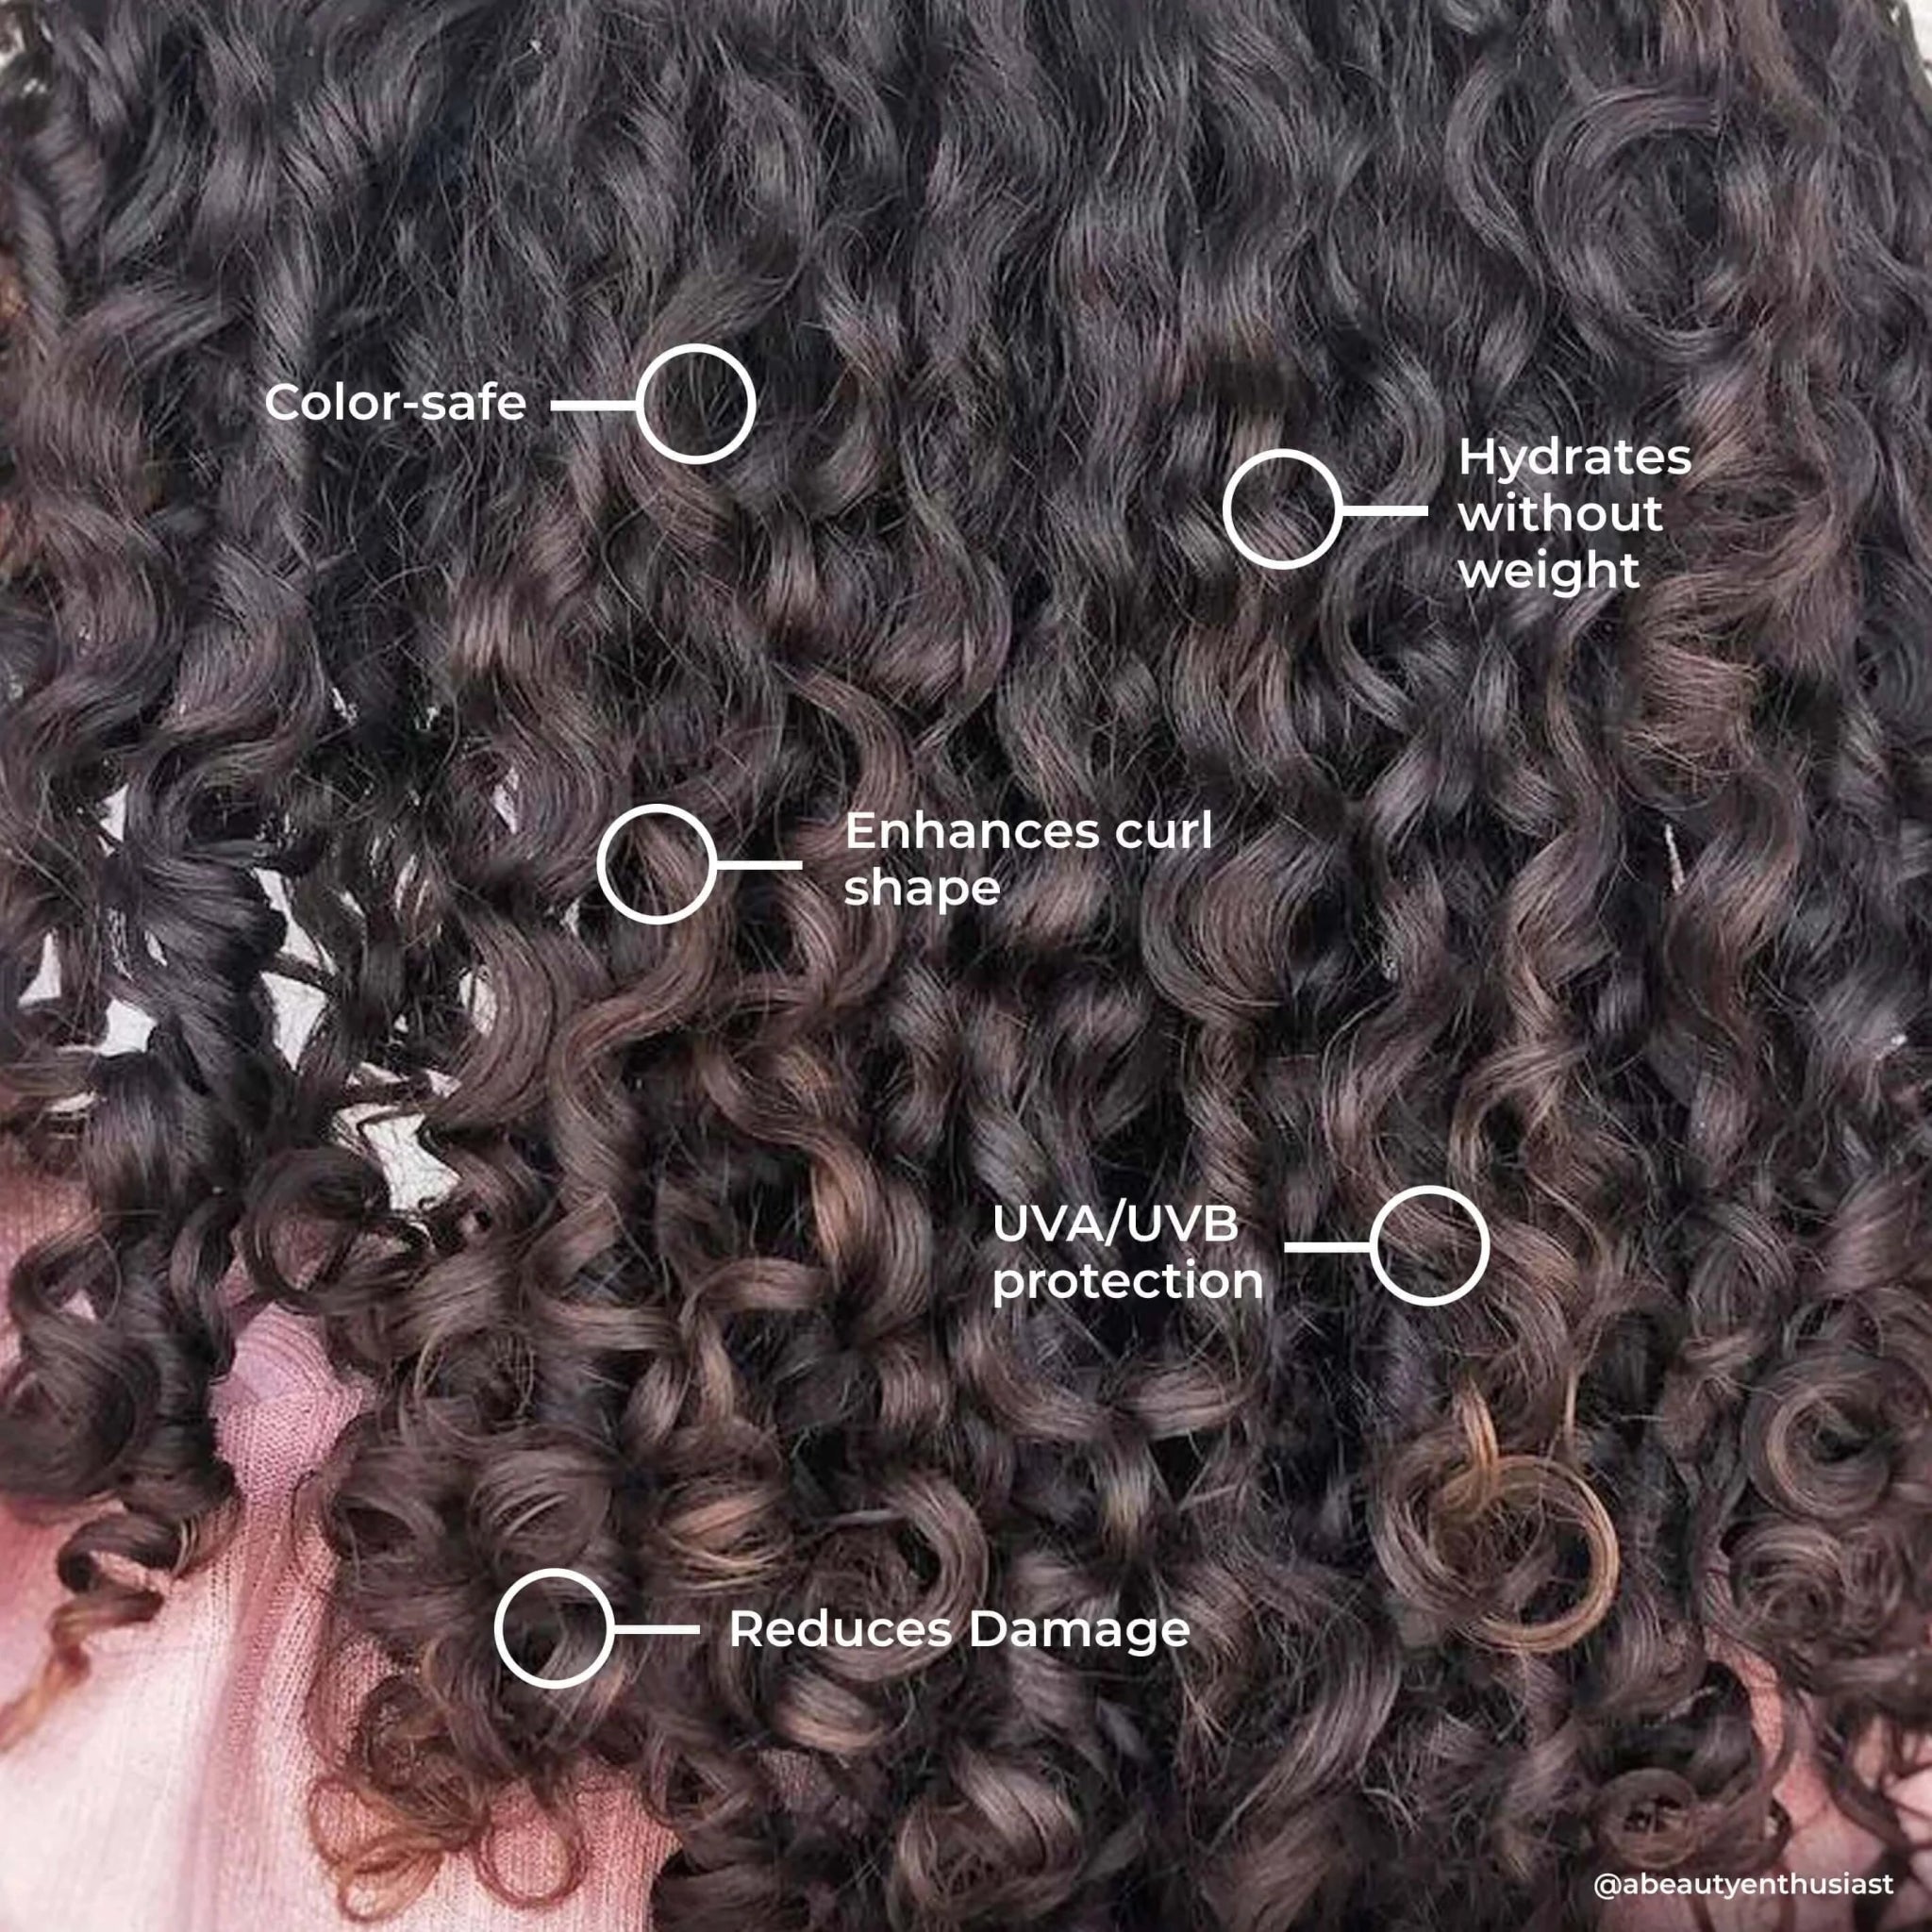 A woman's curly hair is labeled with the keywords "hydration, Leaf & Flower Instant Curl Shampoo and Conditioner Duo".